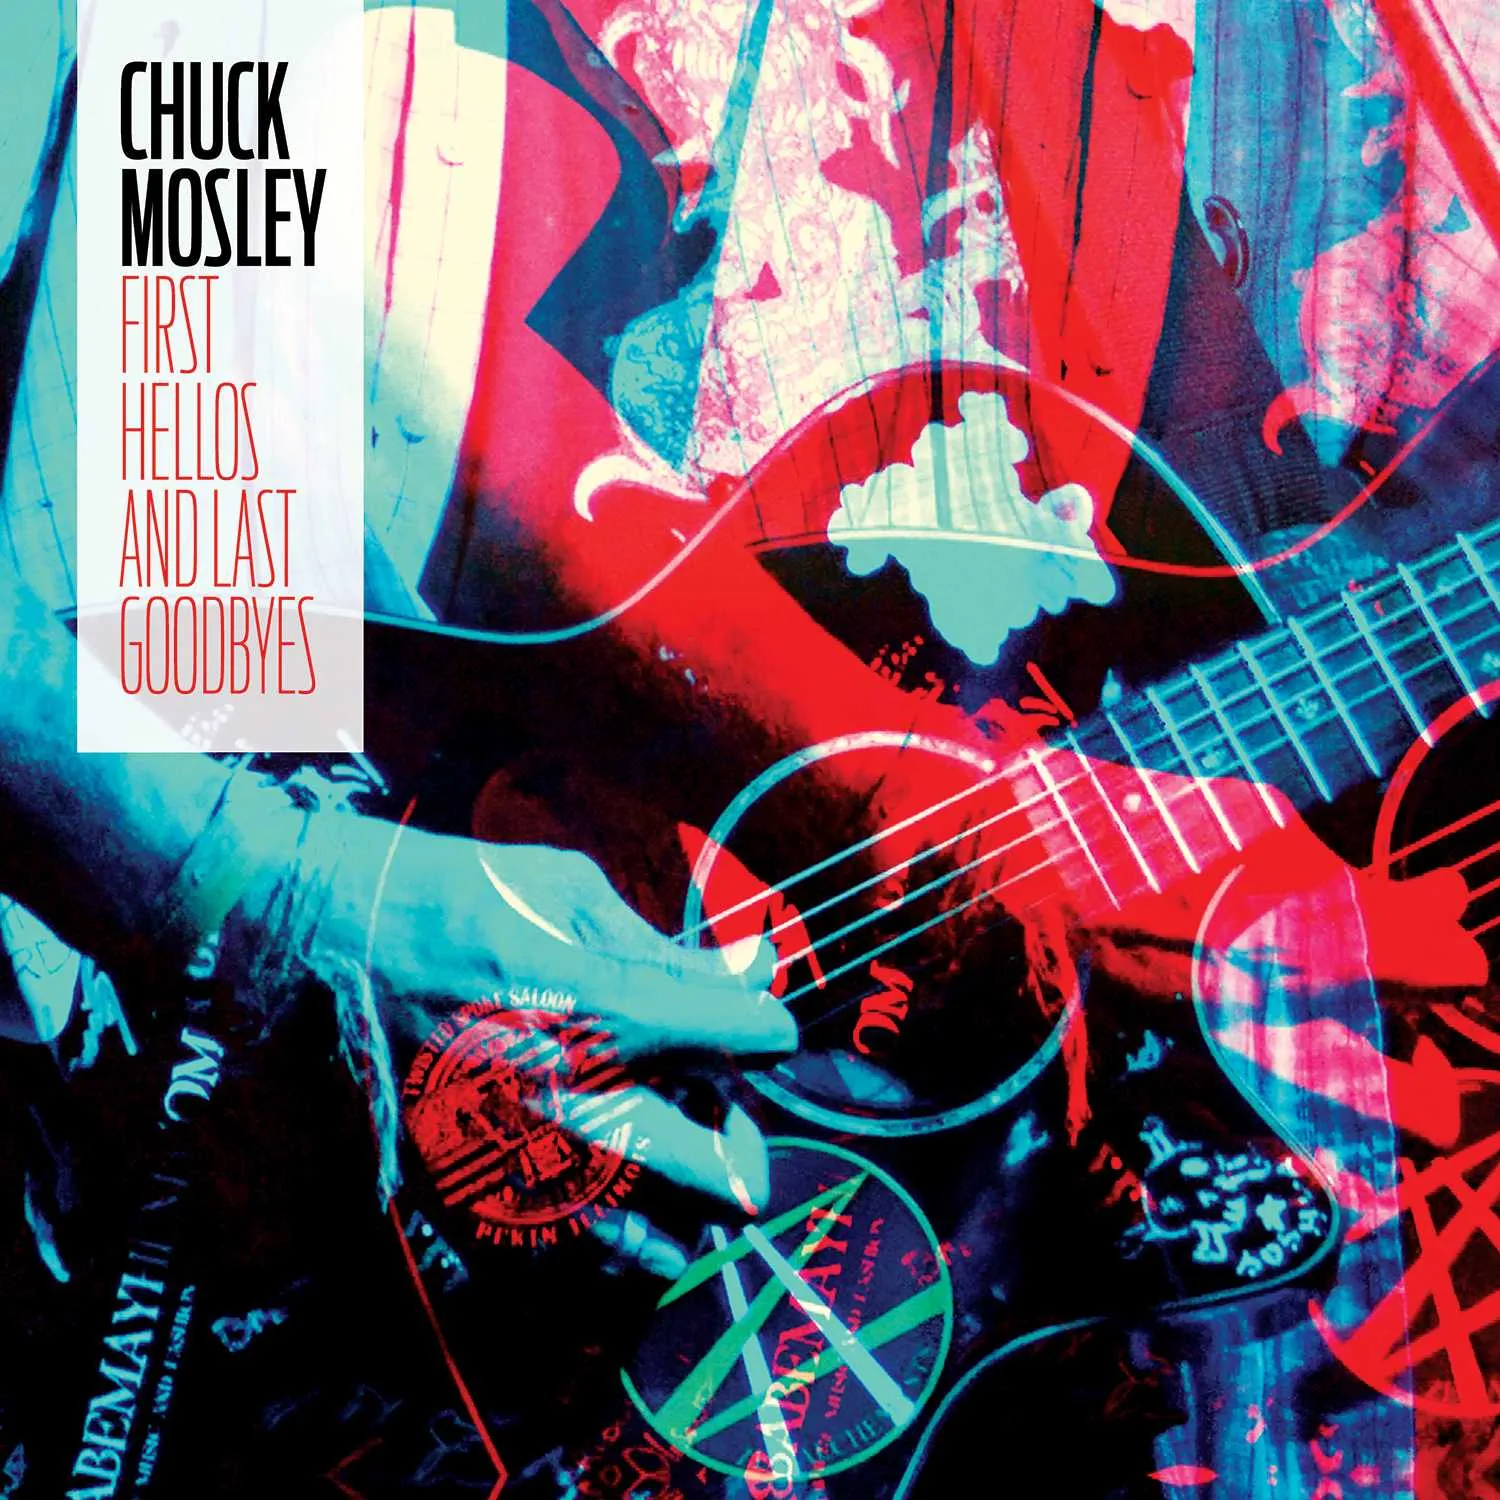 Album cover for “First Hellos and Last Goodbyes” by Chuck Mosley